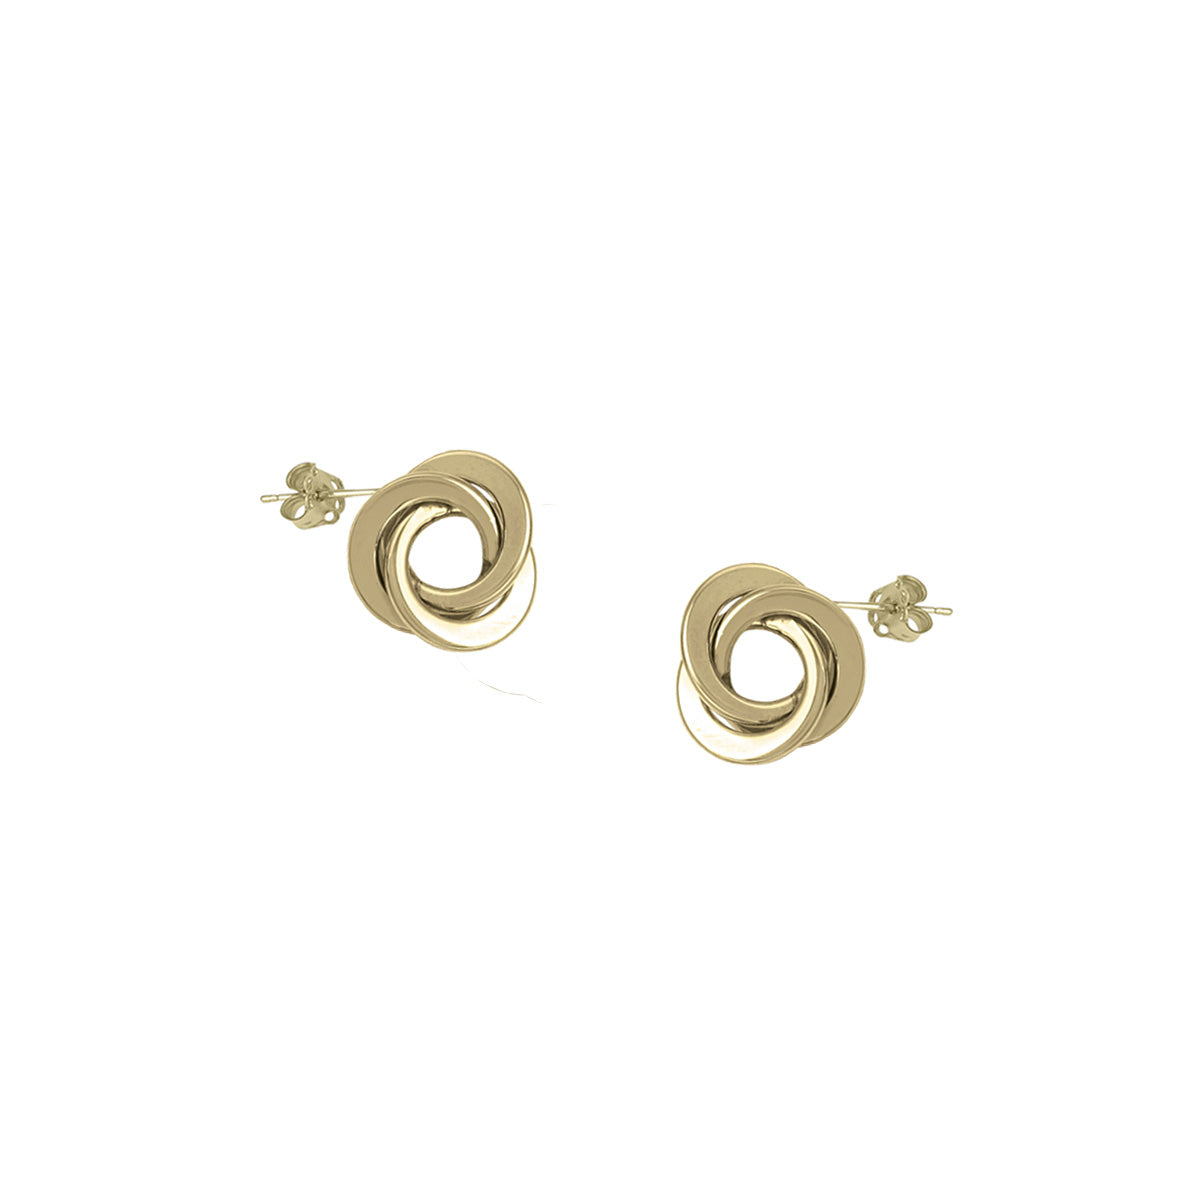 ES0120, Gold Earrings, Studs, Love Knot